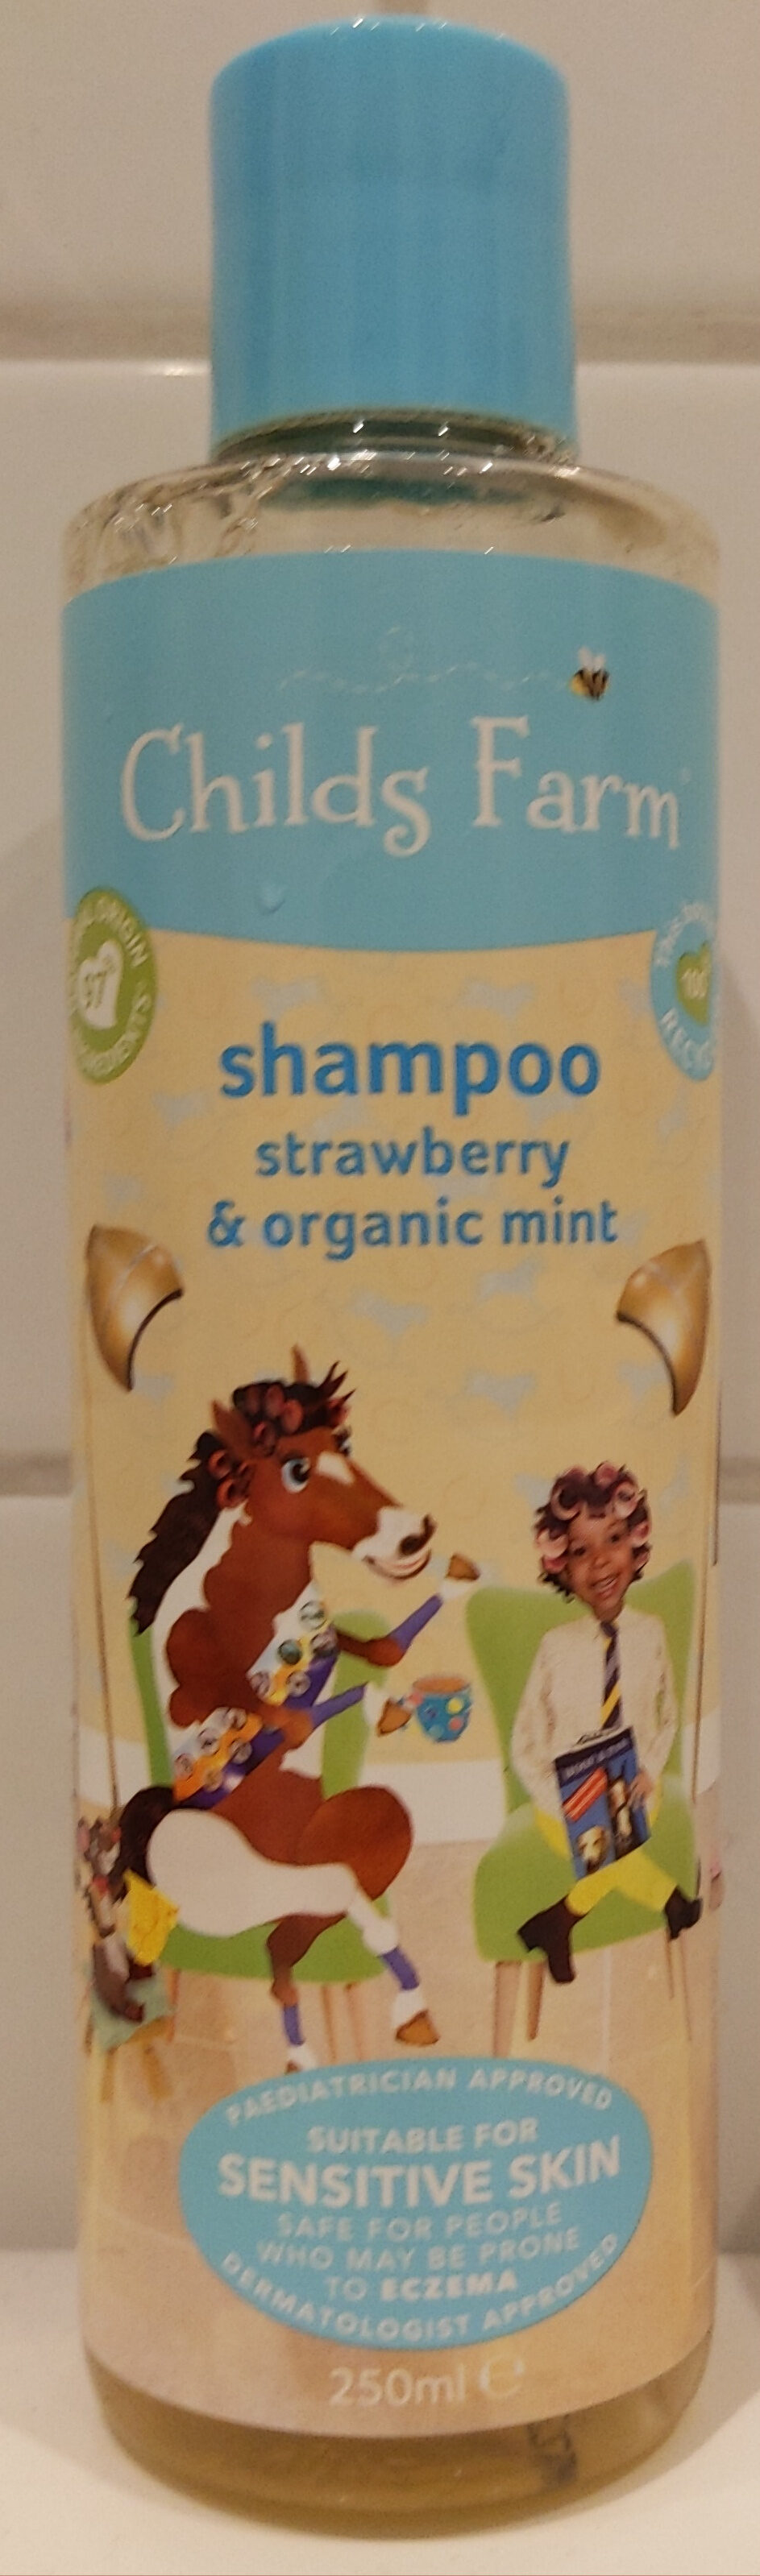 Strawberry and organic mint shampoo - Product - en